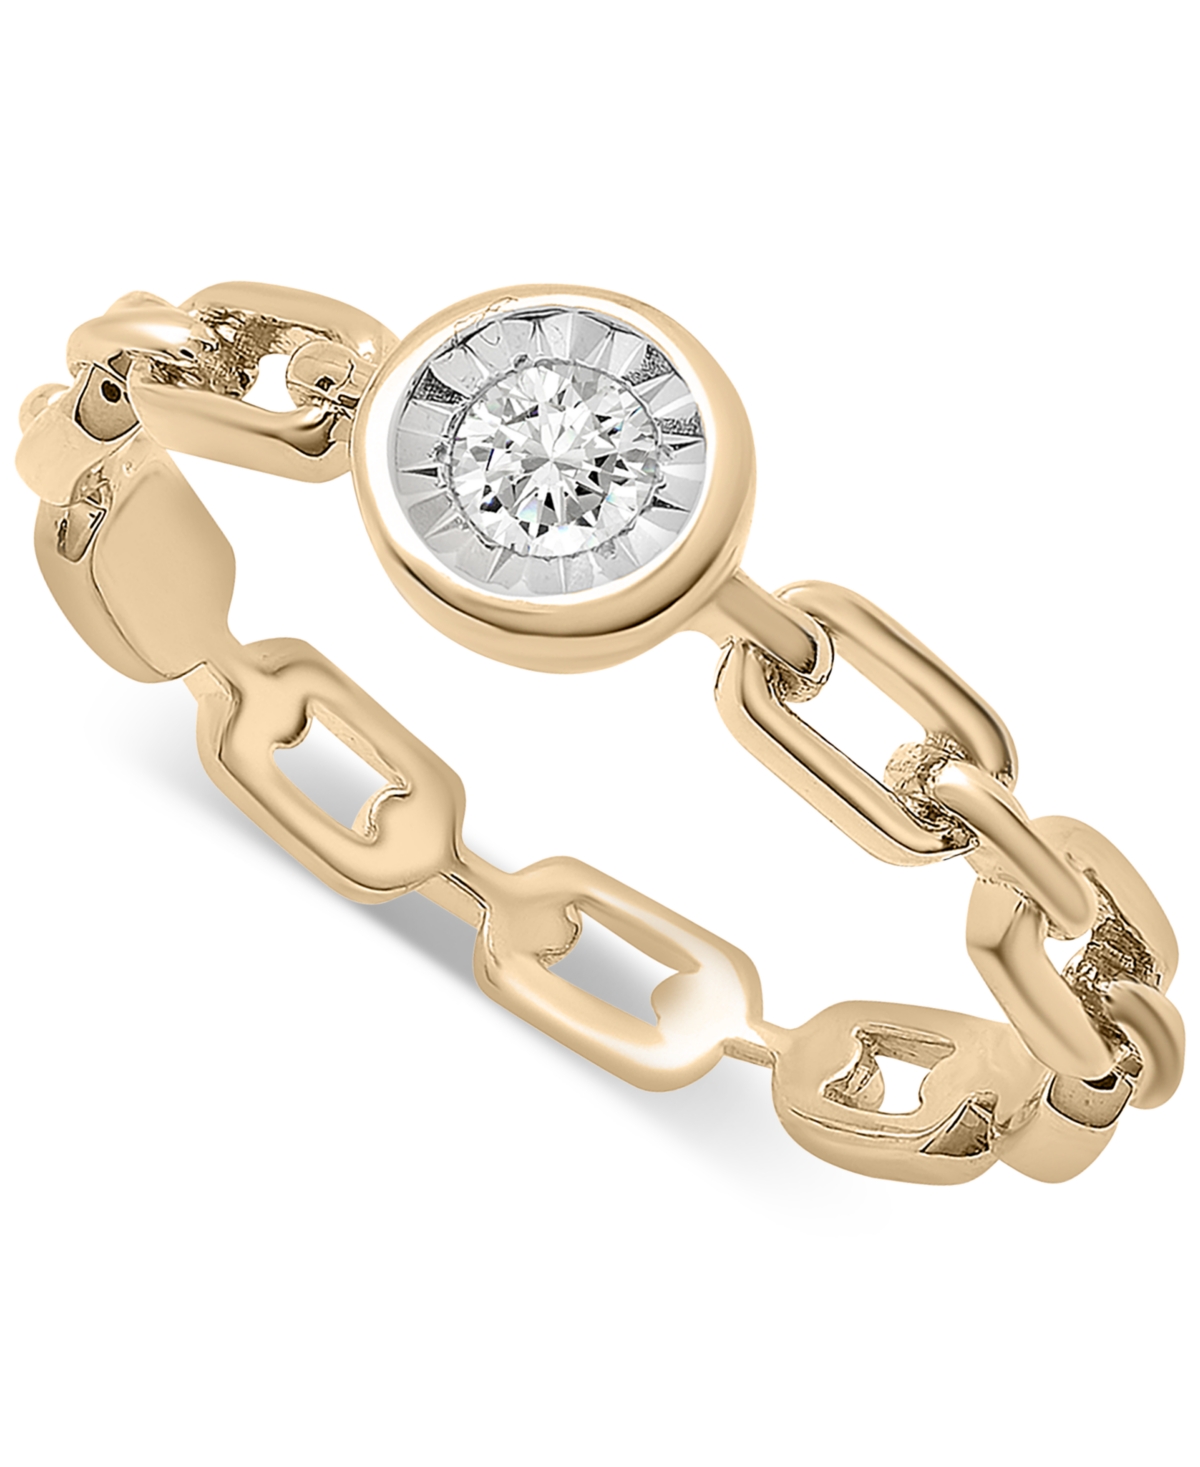 Diamond Chain Link Ring (1/10 ct. t.w.) in Gold Vermeil, Created for Macy's - Gold Vermeil